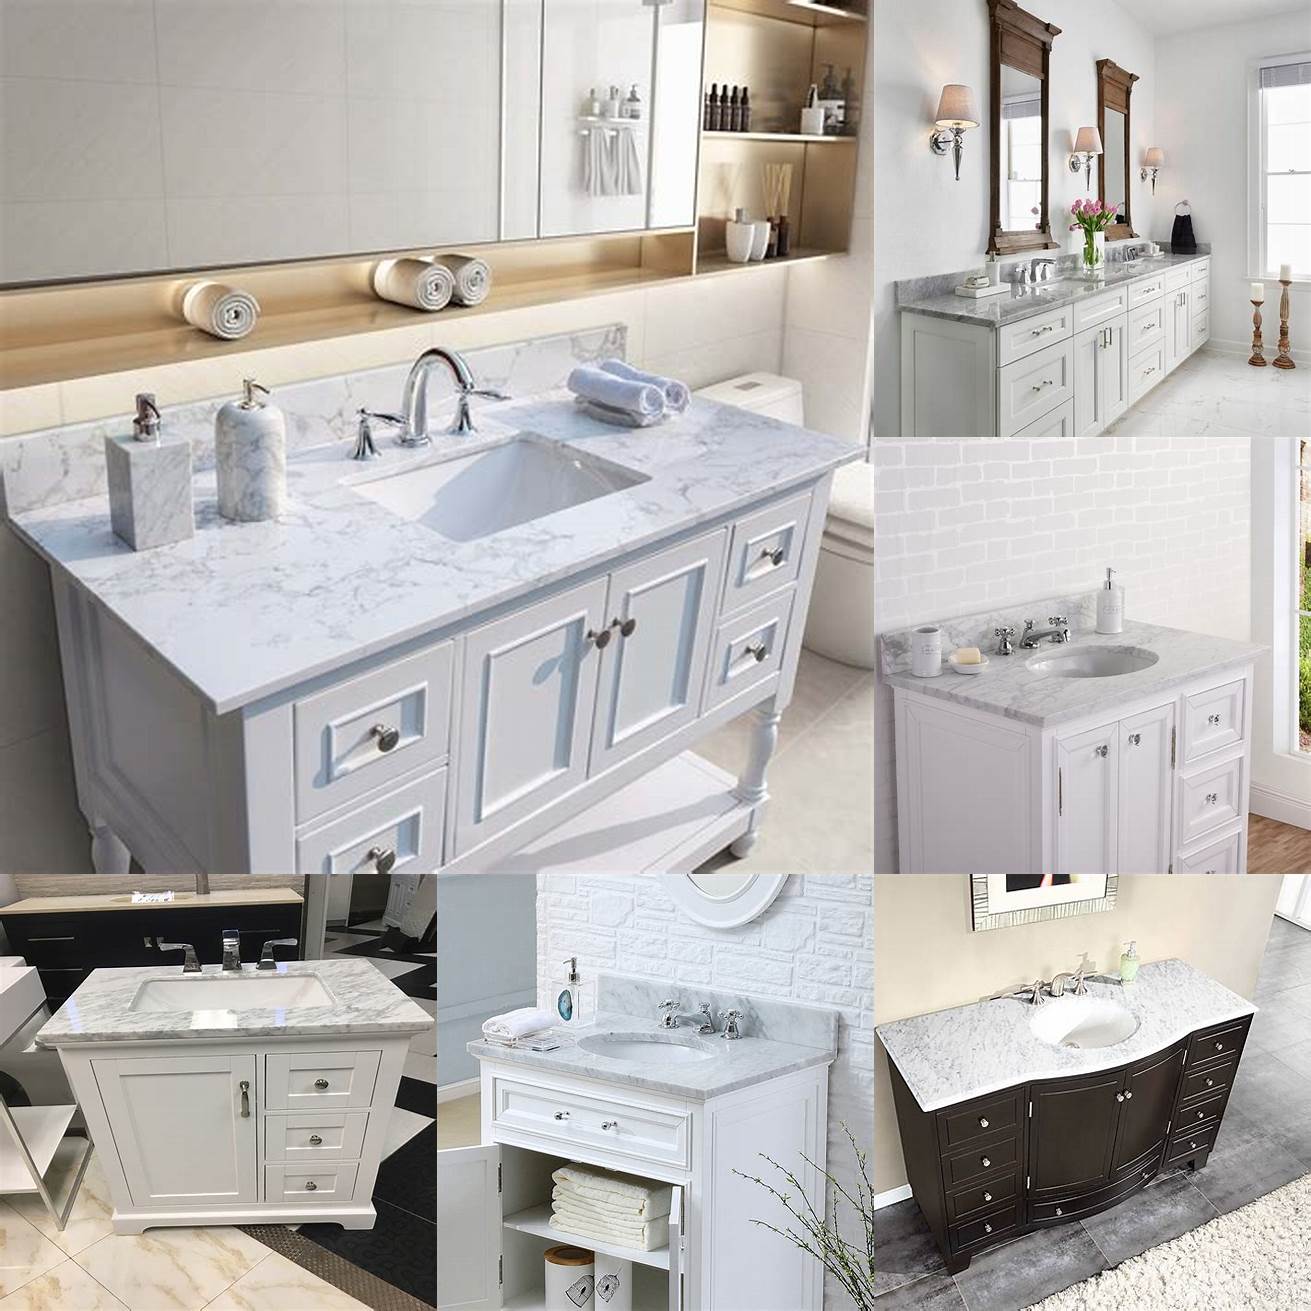 A classic white marble bathroom vanity with a matching marble top